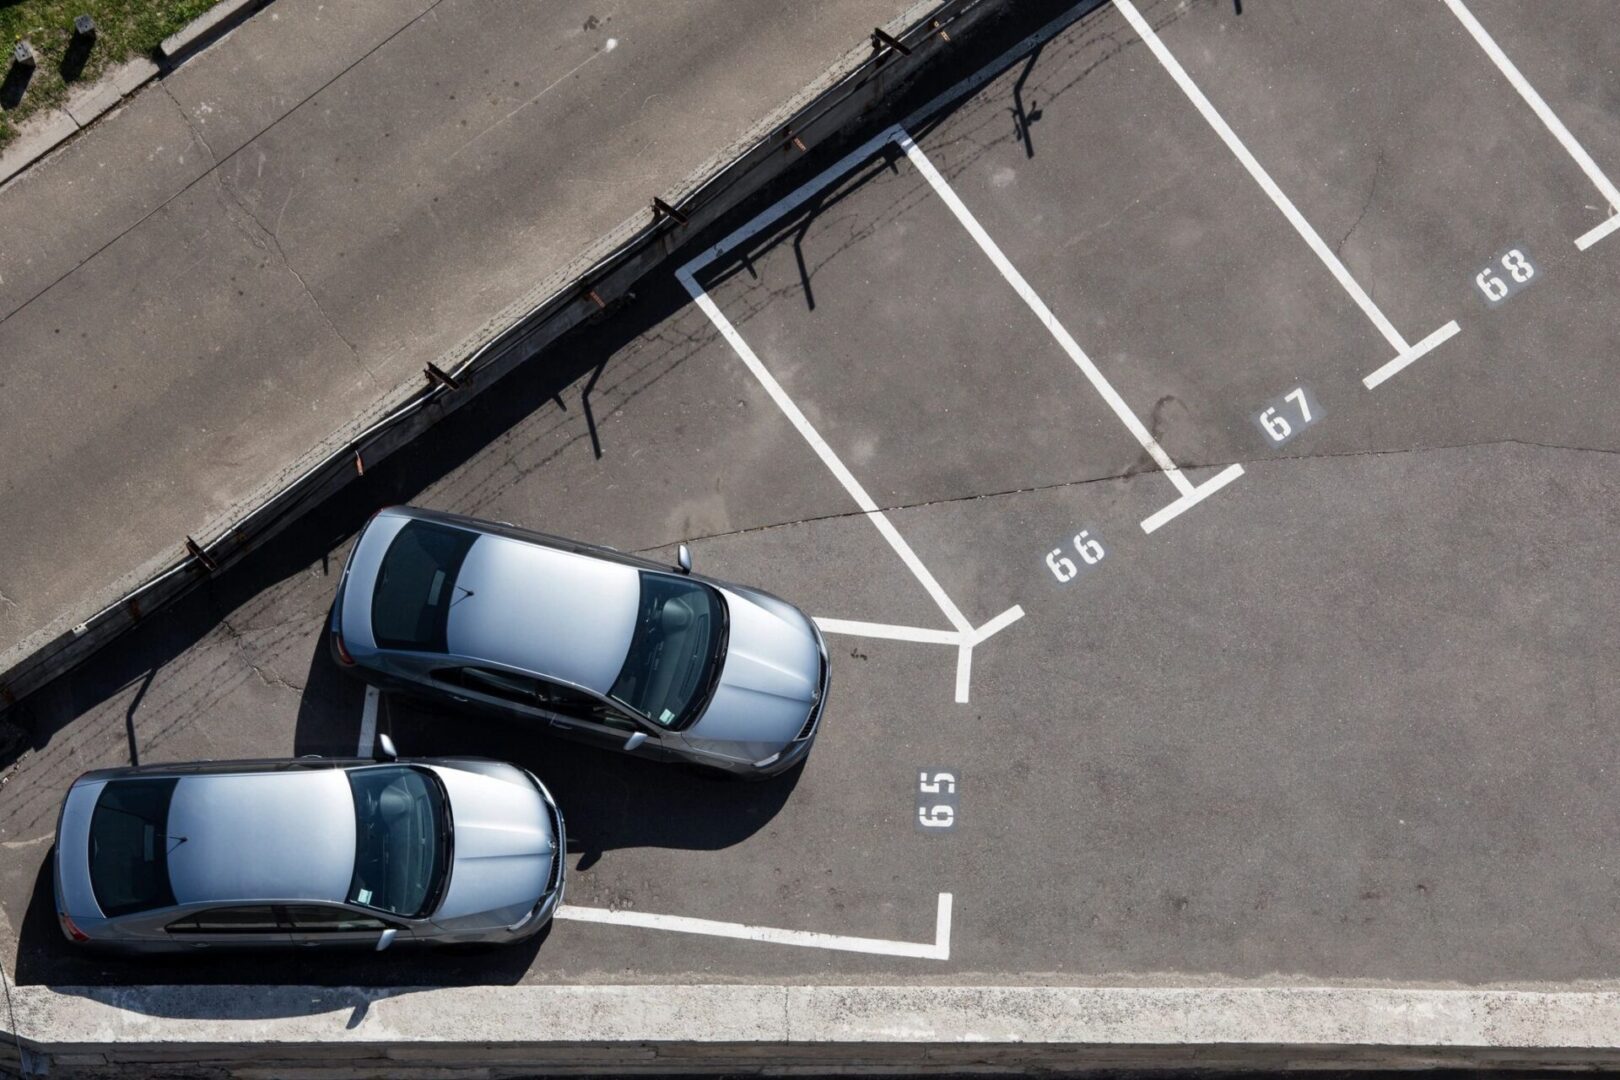 Parking Compliance Solutions